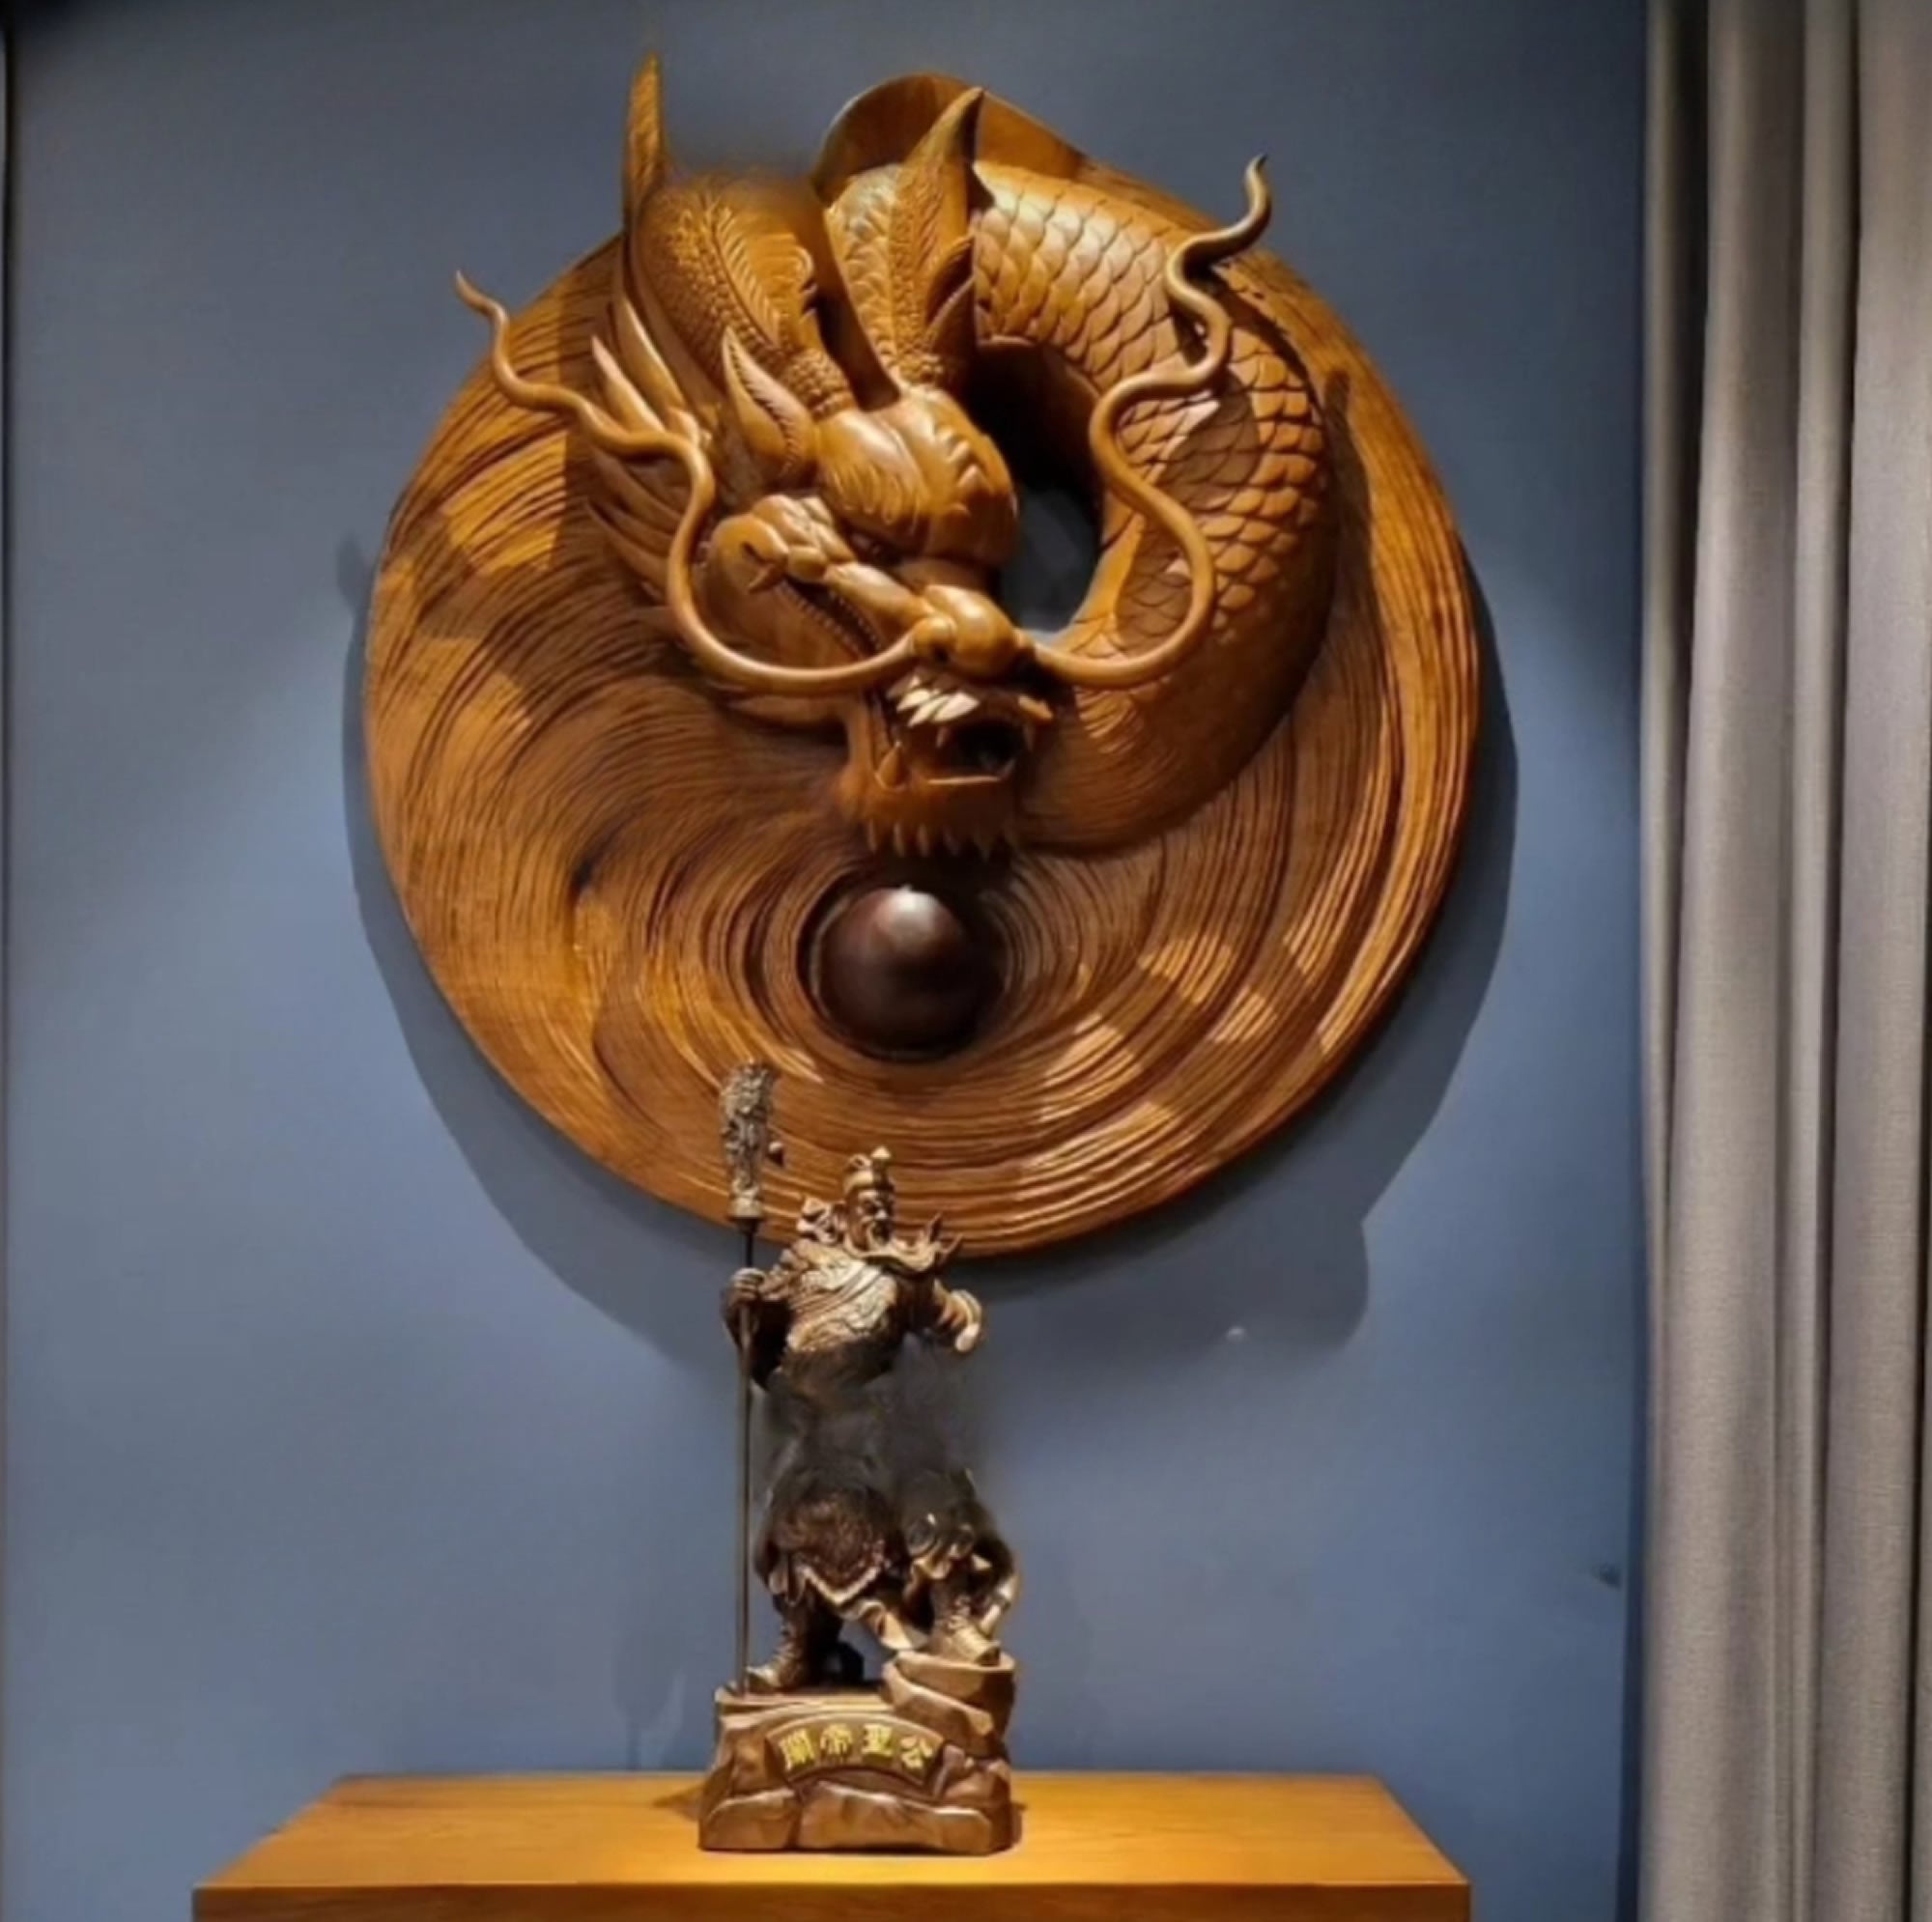 This is a rare and unique hand-carved Chinese Dragon Ball decorative wall art sculpture. Handcrafted from a single piece of solid teakwood this is a true timeless masterpiece. This will undoubtedly add elegance, style, and a focal point to any room. With intricate detail and beauty, it draws attention. 